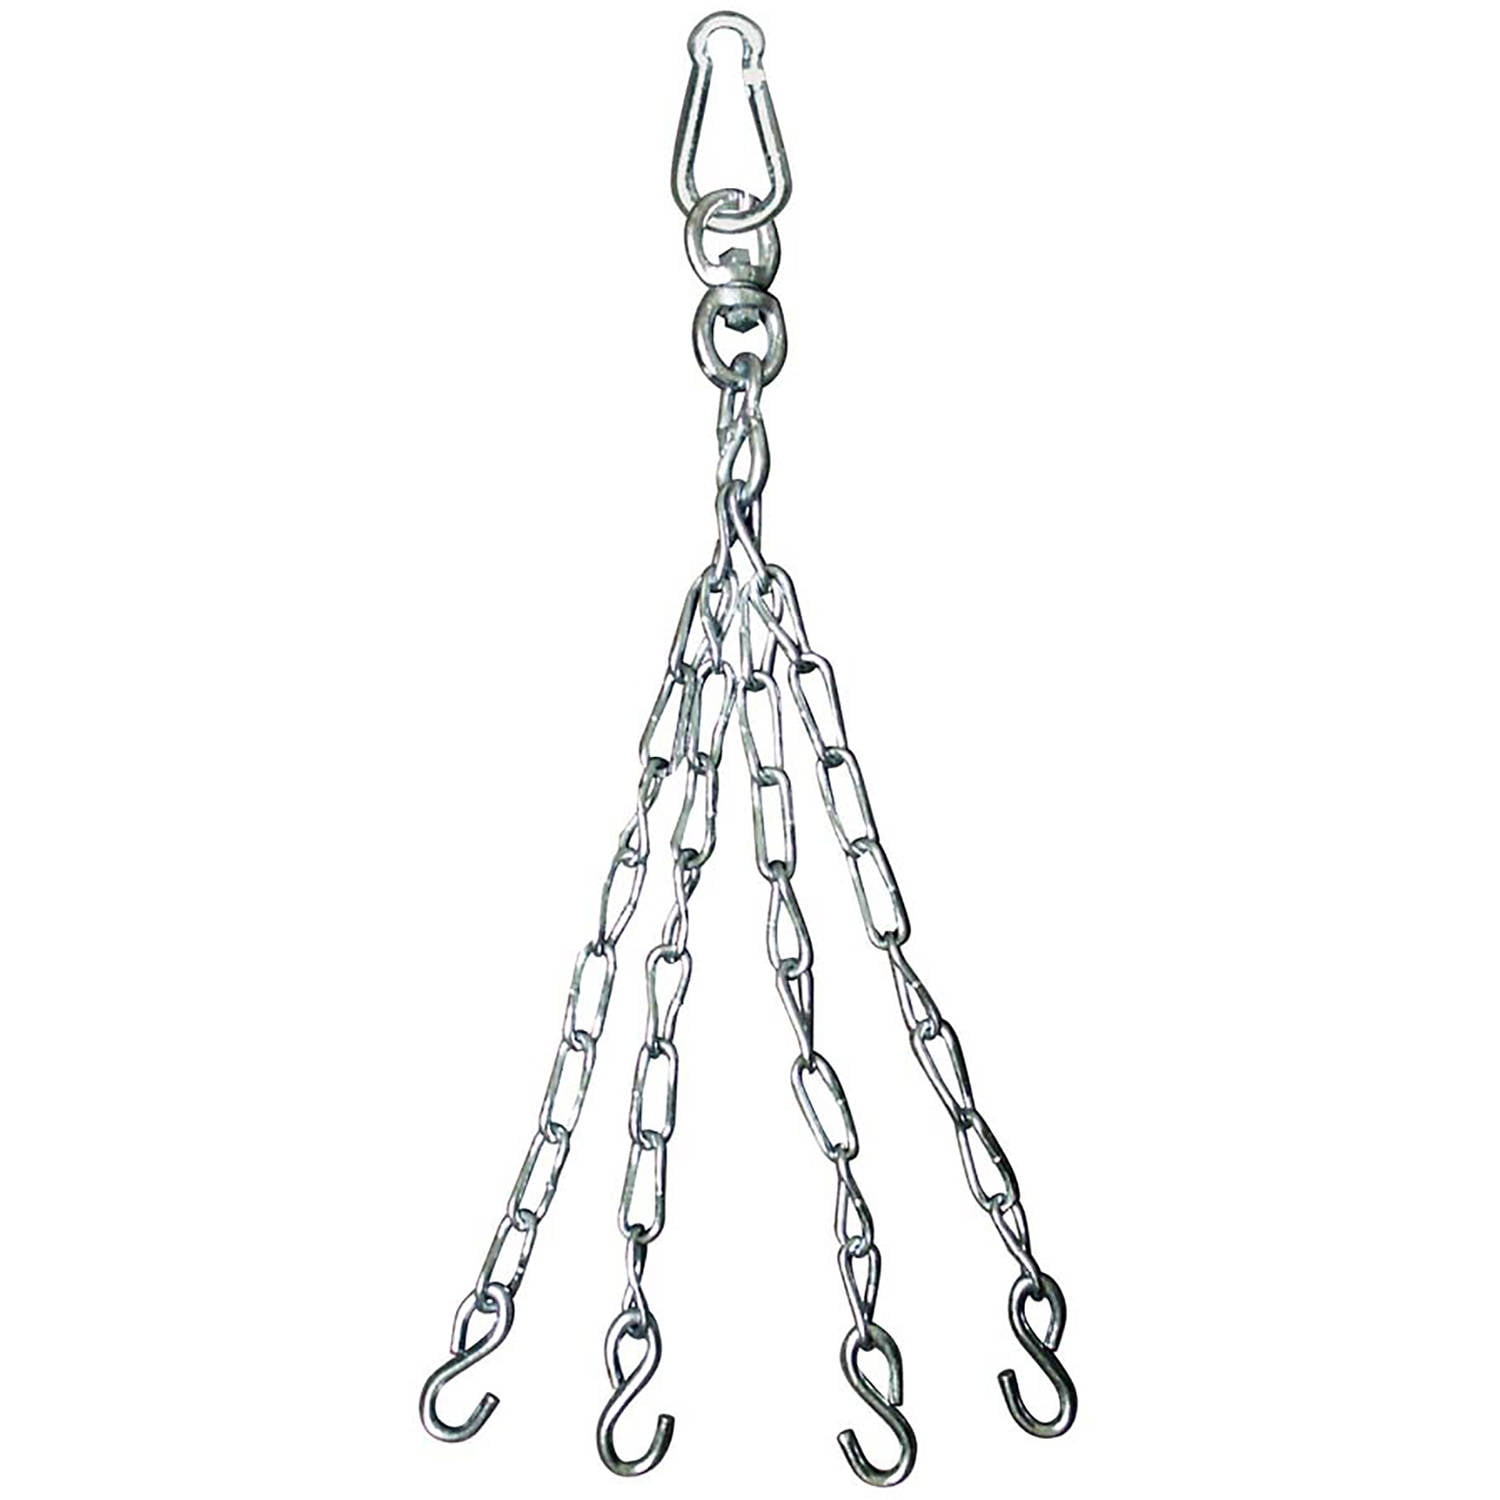 Heavy Bag Boxing Duty Punching Chains Training Us Chain Hanging Swivel up 150lbs 